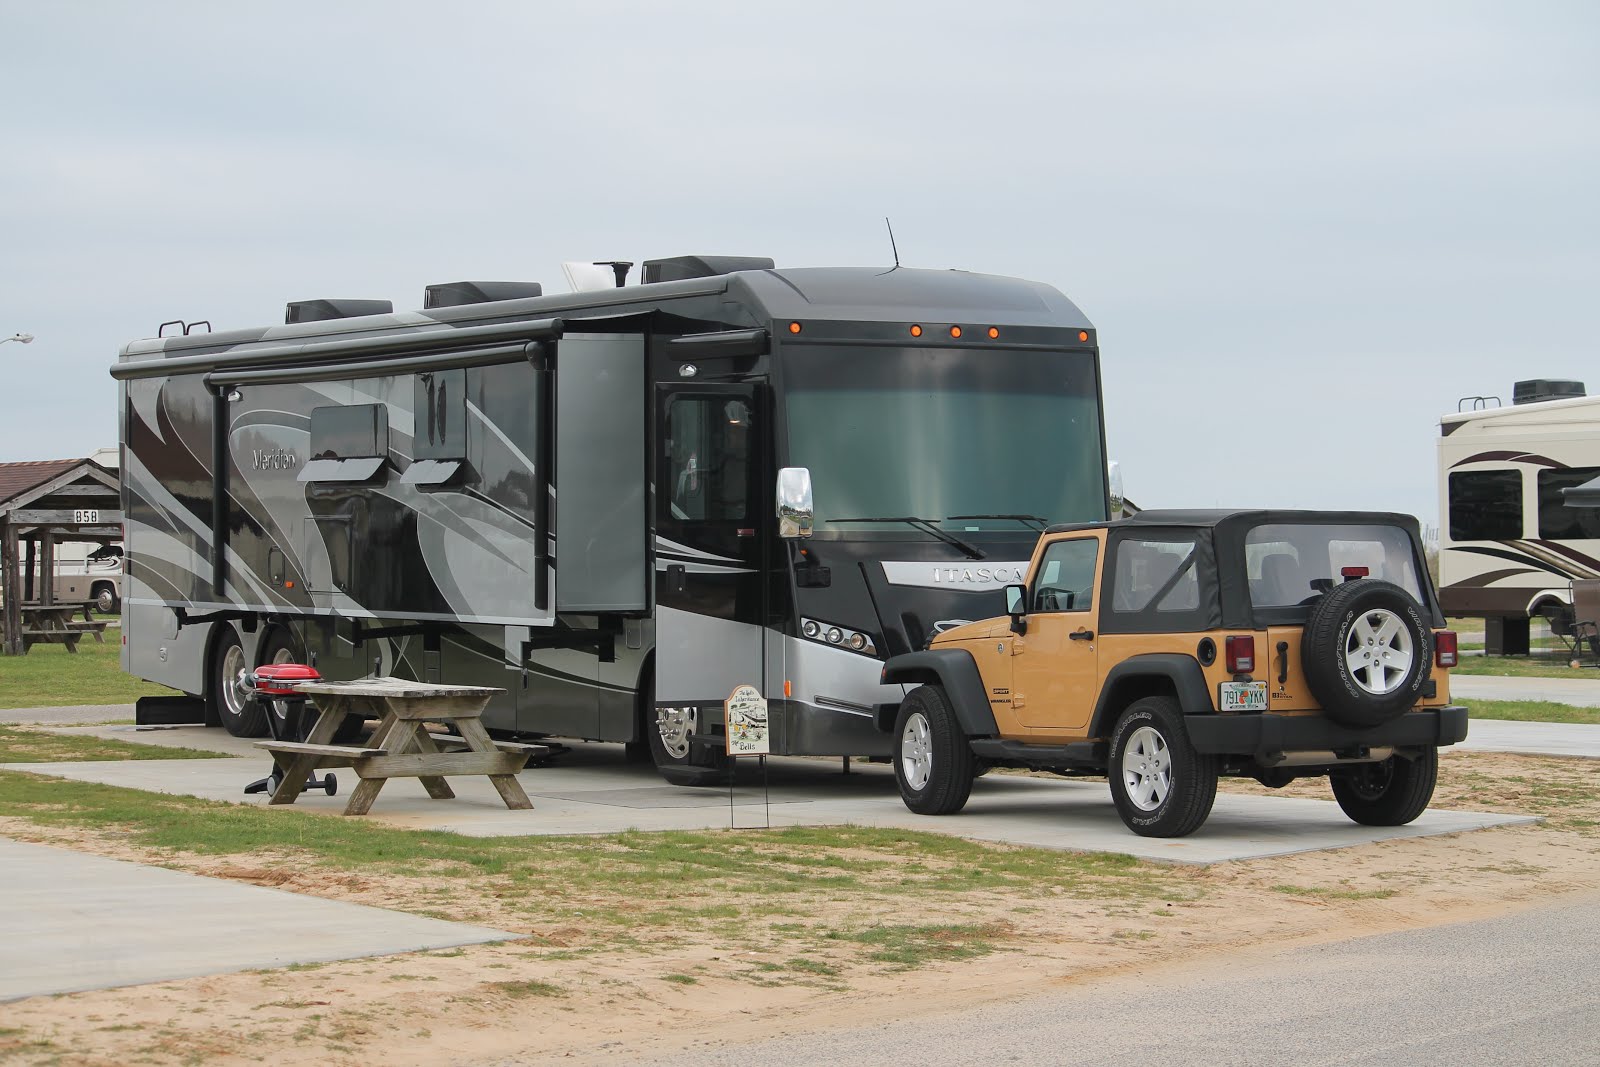 Our Motorhome and Jeep